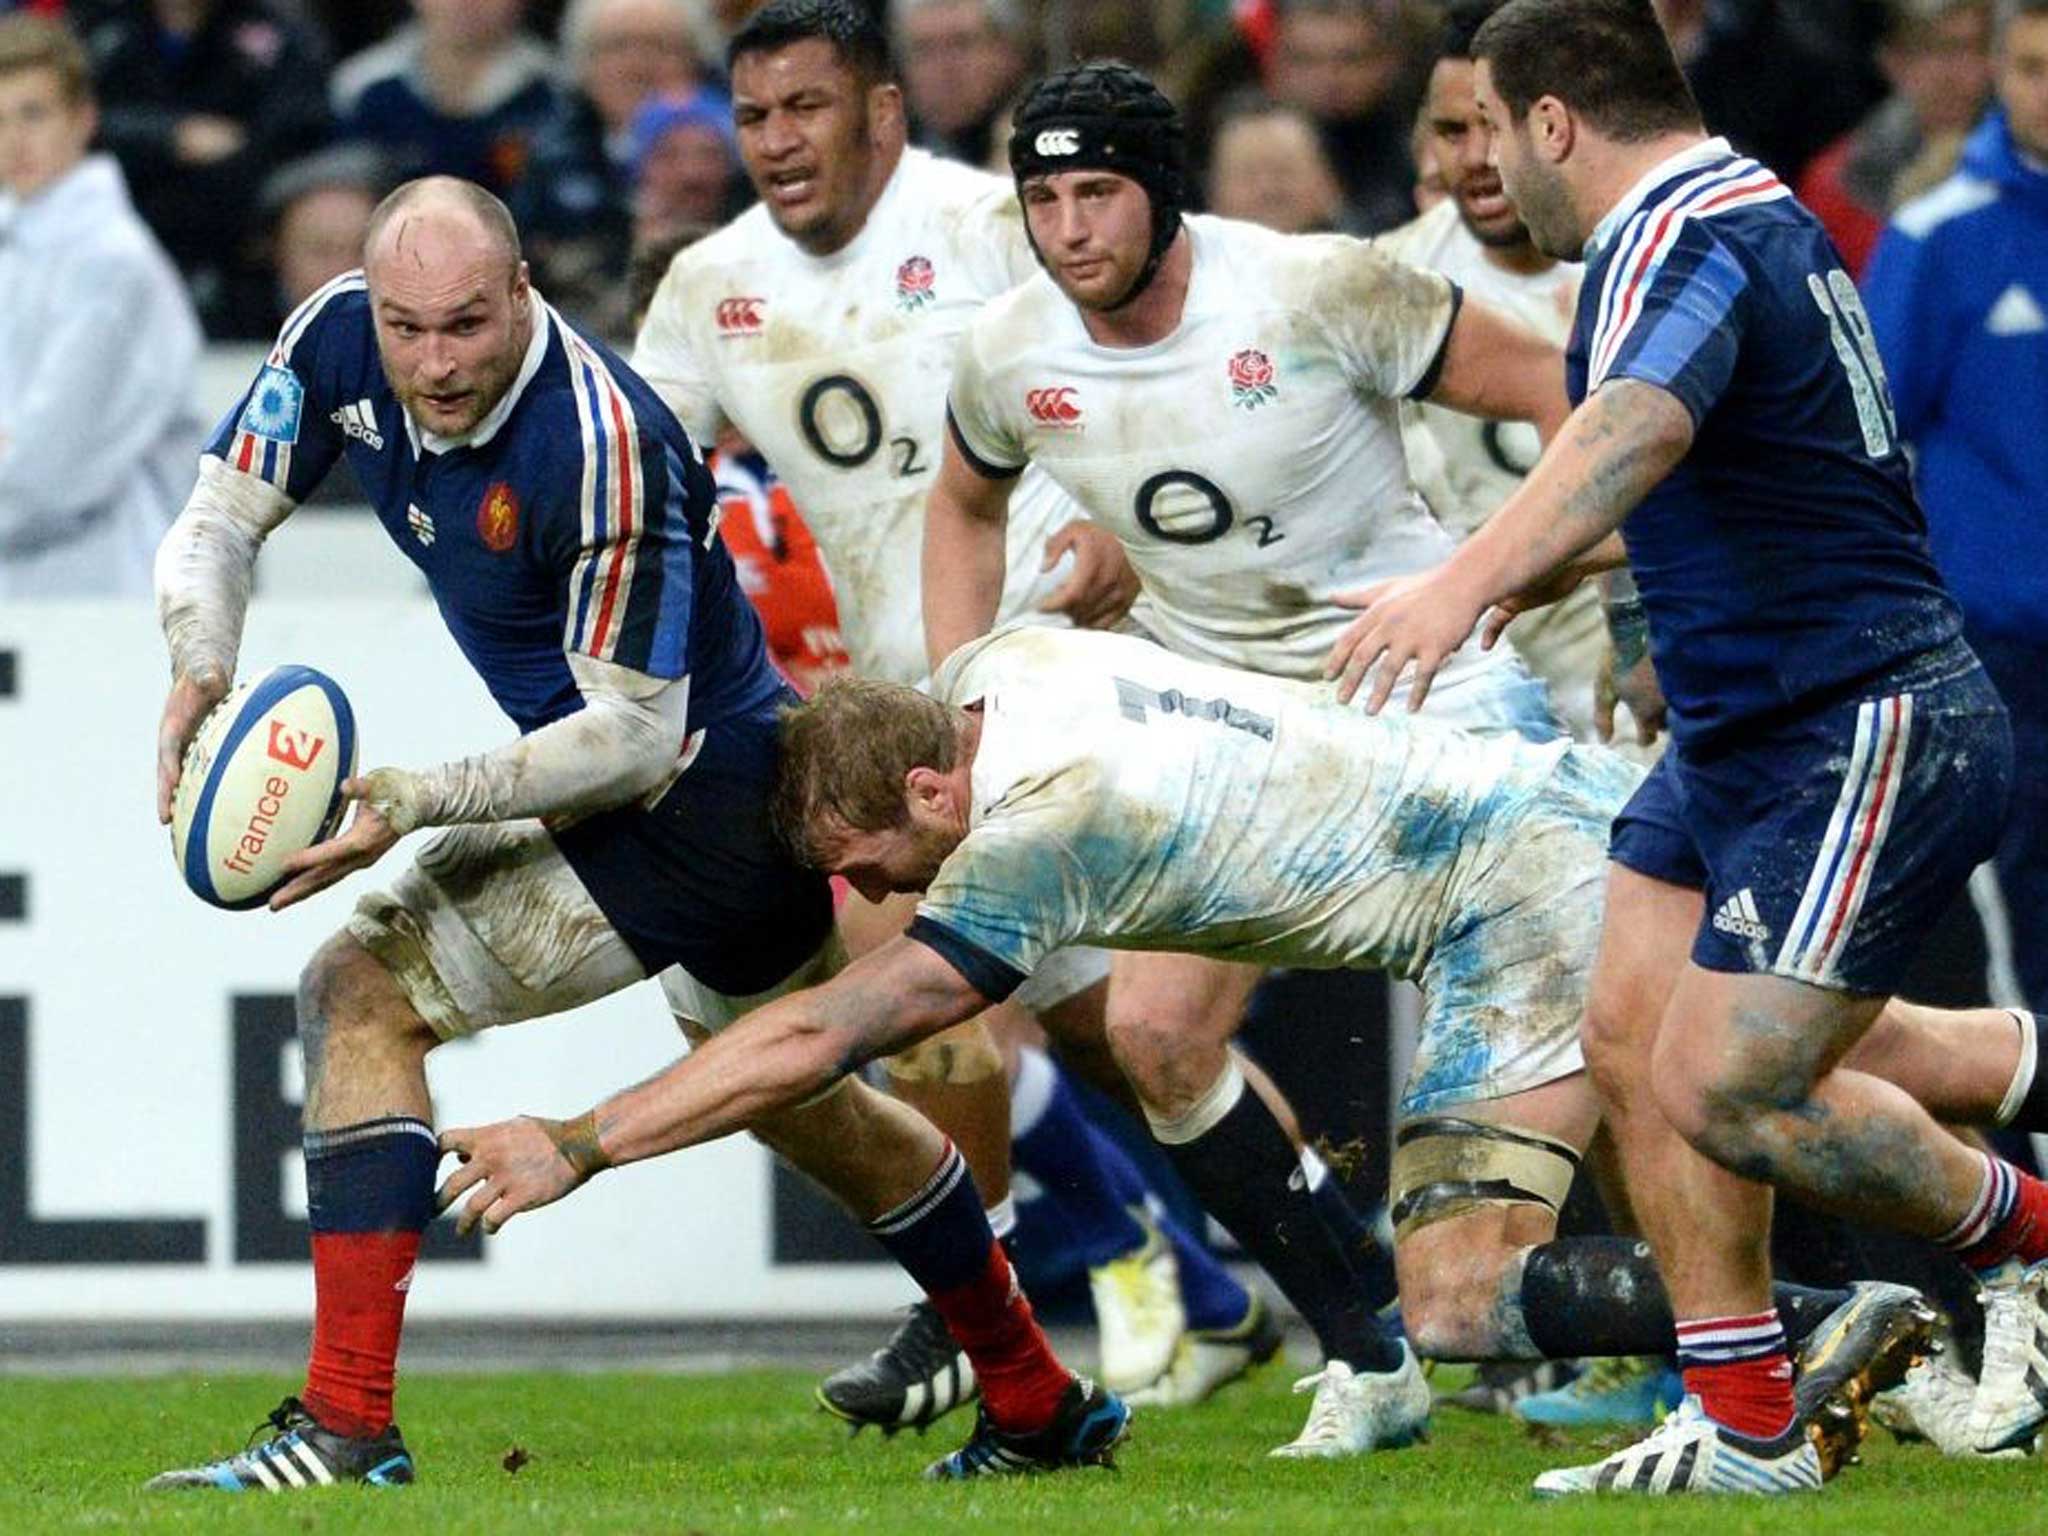 French player Antoine Burban fights for the ball against English player Chris Robshaw